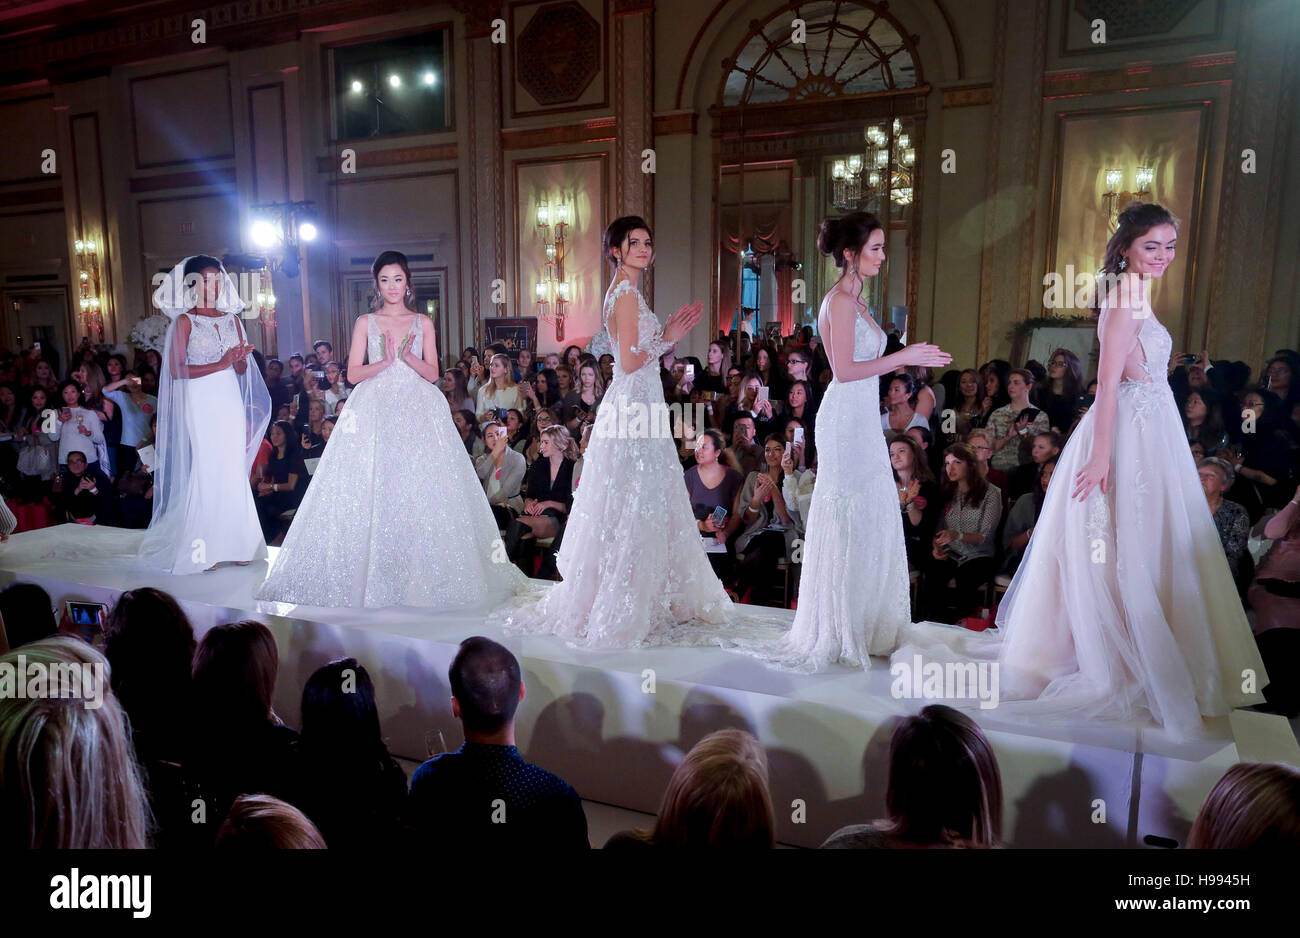 Vancouver, Canada. 20th Nov, 2016. Models show the luxury wedding dresses on stage during the CREME DE LA CREME Grand Wedding Showcase event in Vancouver, Canada, Nov. 20, 2016. The annual CREME DE LA CREME Grand Wedding Showcase is Vancouver's most luxury wedding show event showcasing hi-end wedding gowns, services, venue designs and wedding products for the high society brides. Credit:  Liang Sen/Xinhua/Alamy Live News Stock Photo